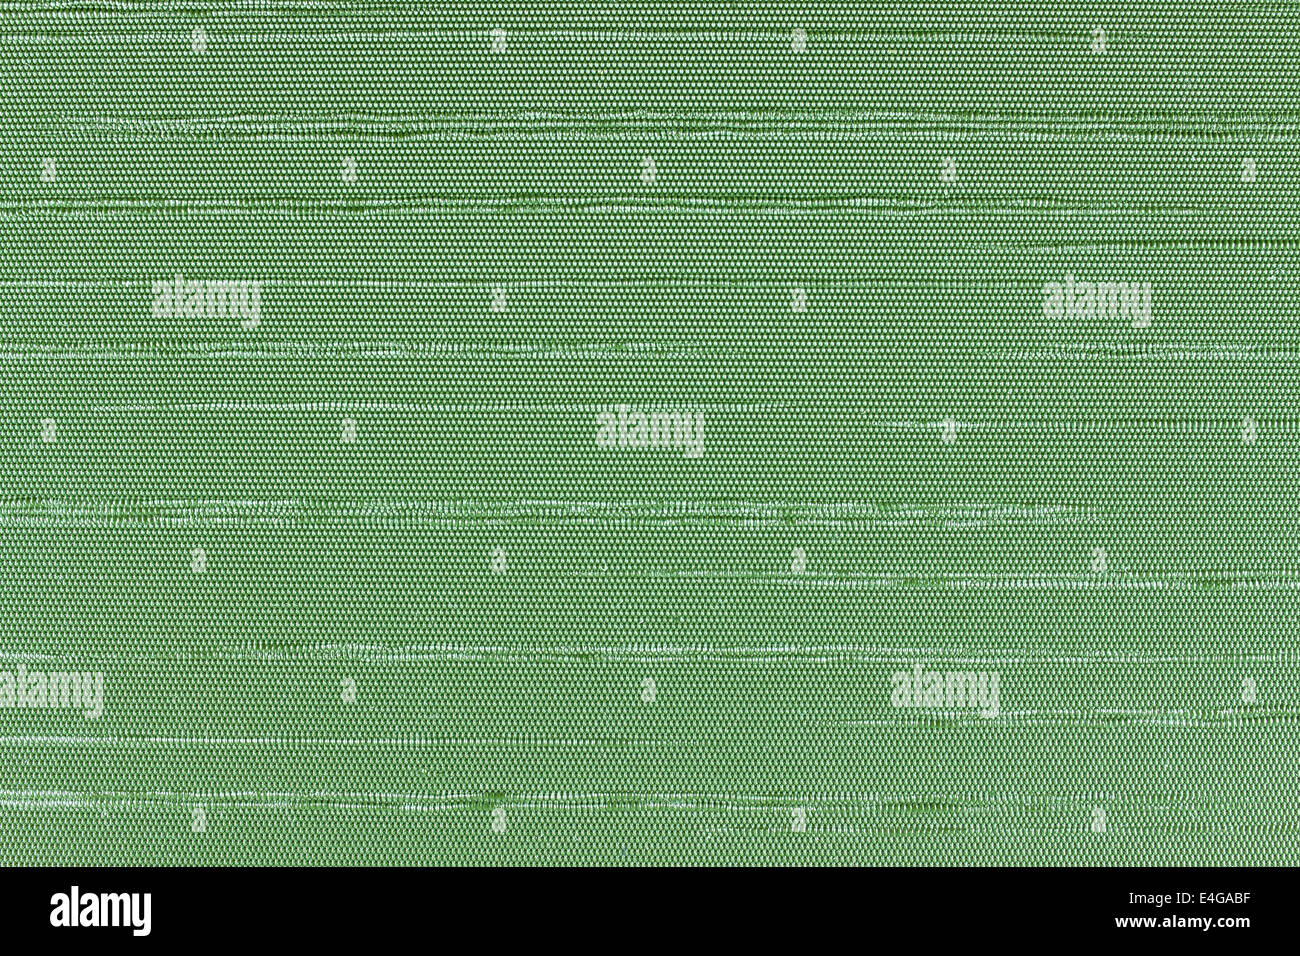 Traditional green Thai fabric pattern as background Stock Photo